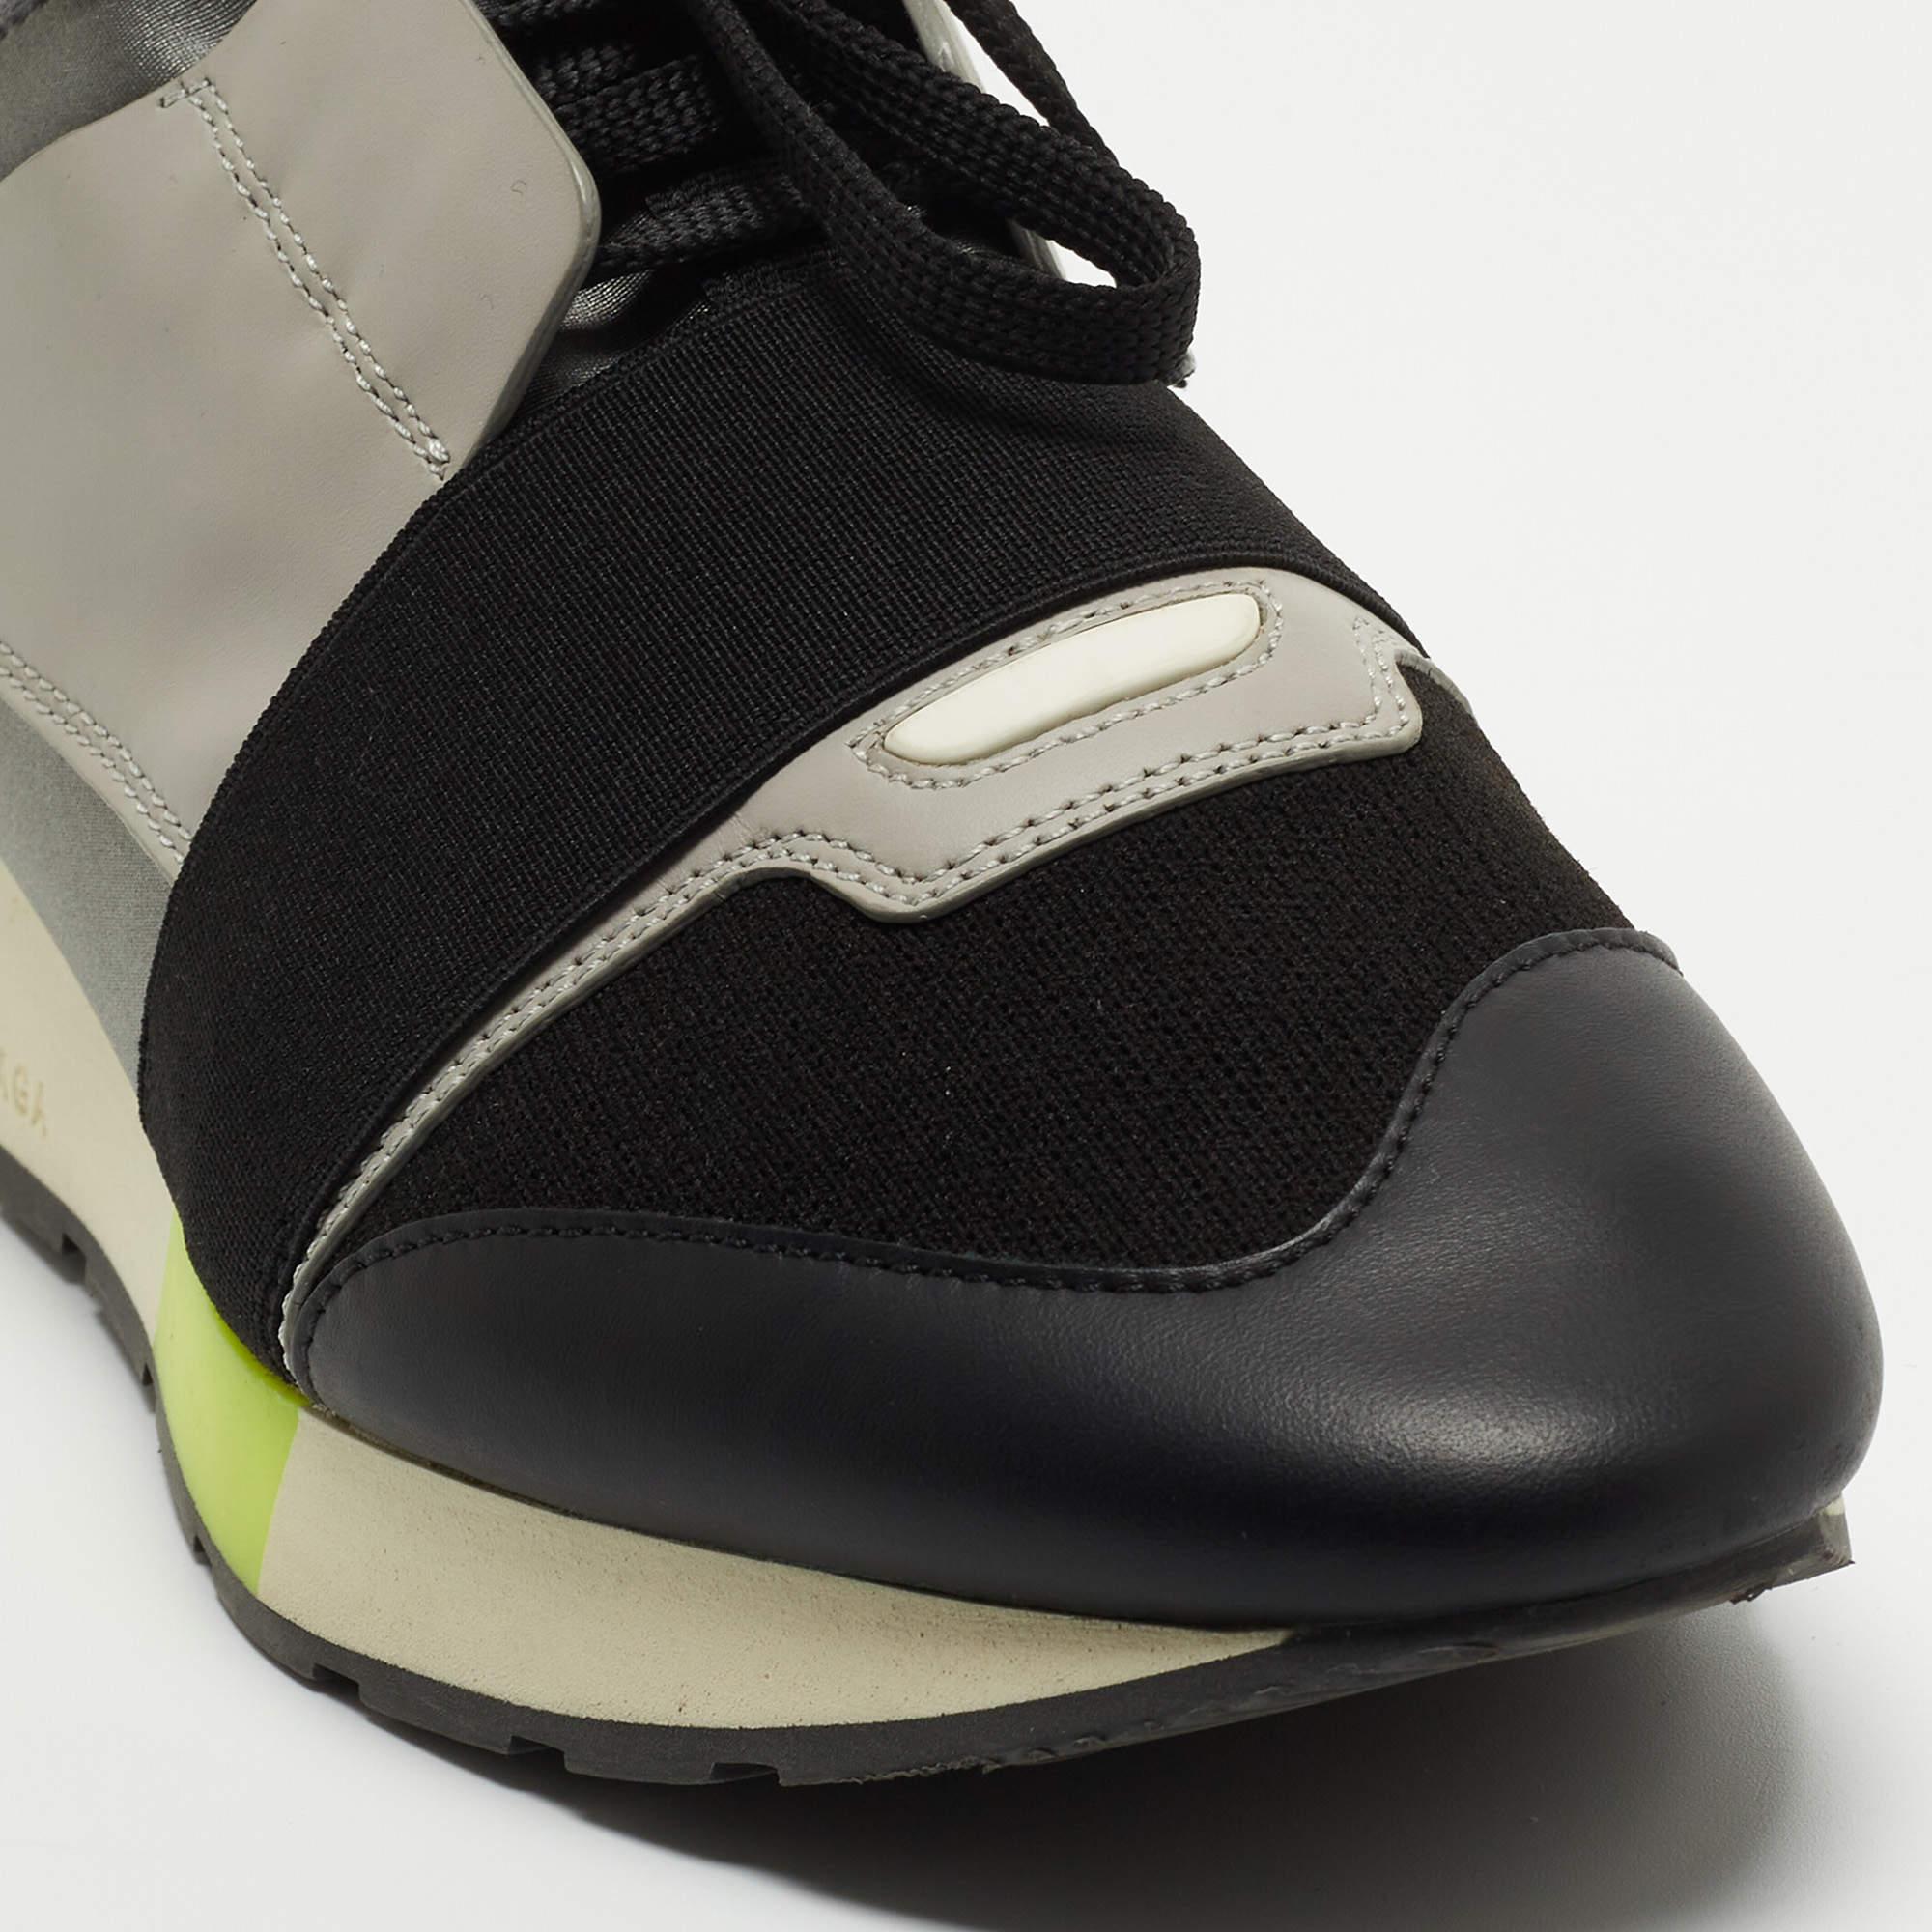 Balenciaga Tricolor Leather and Fabric Race Runner Low Top Sneakers In Good Condition For Sale In Dubai, Al Qouz 2